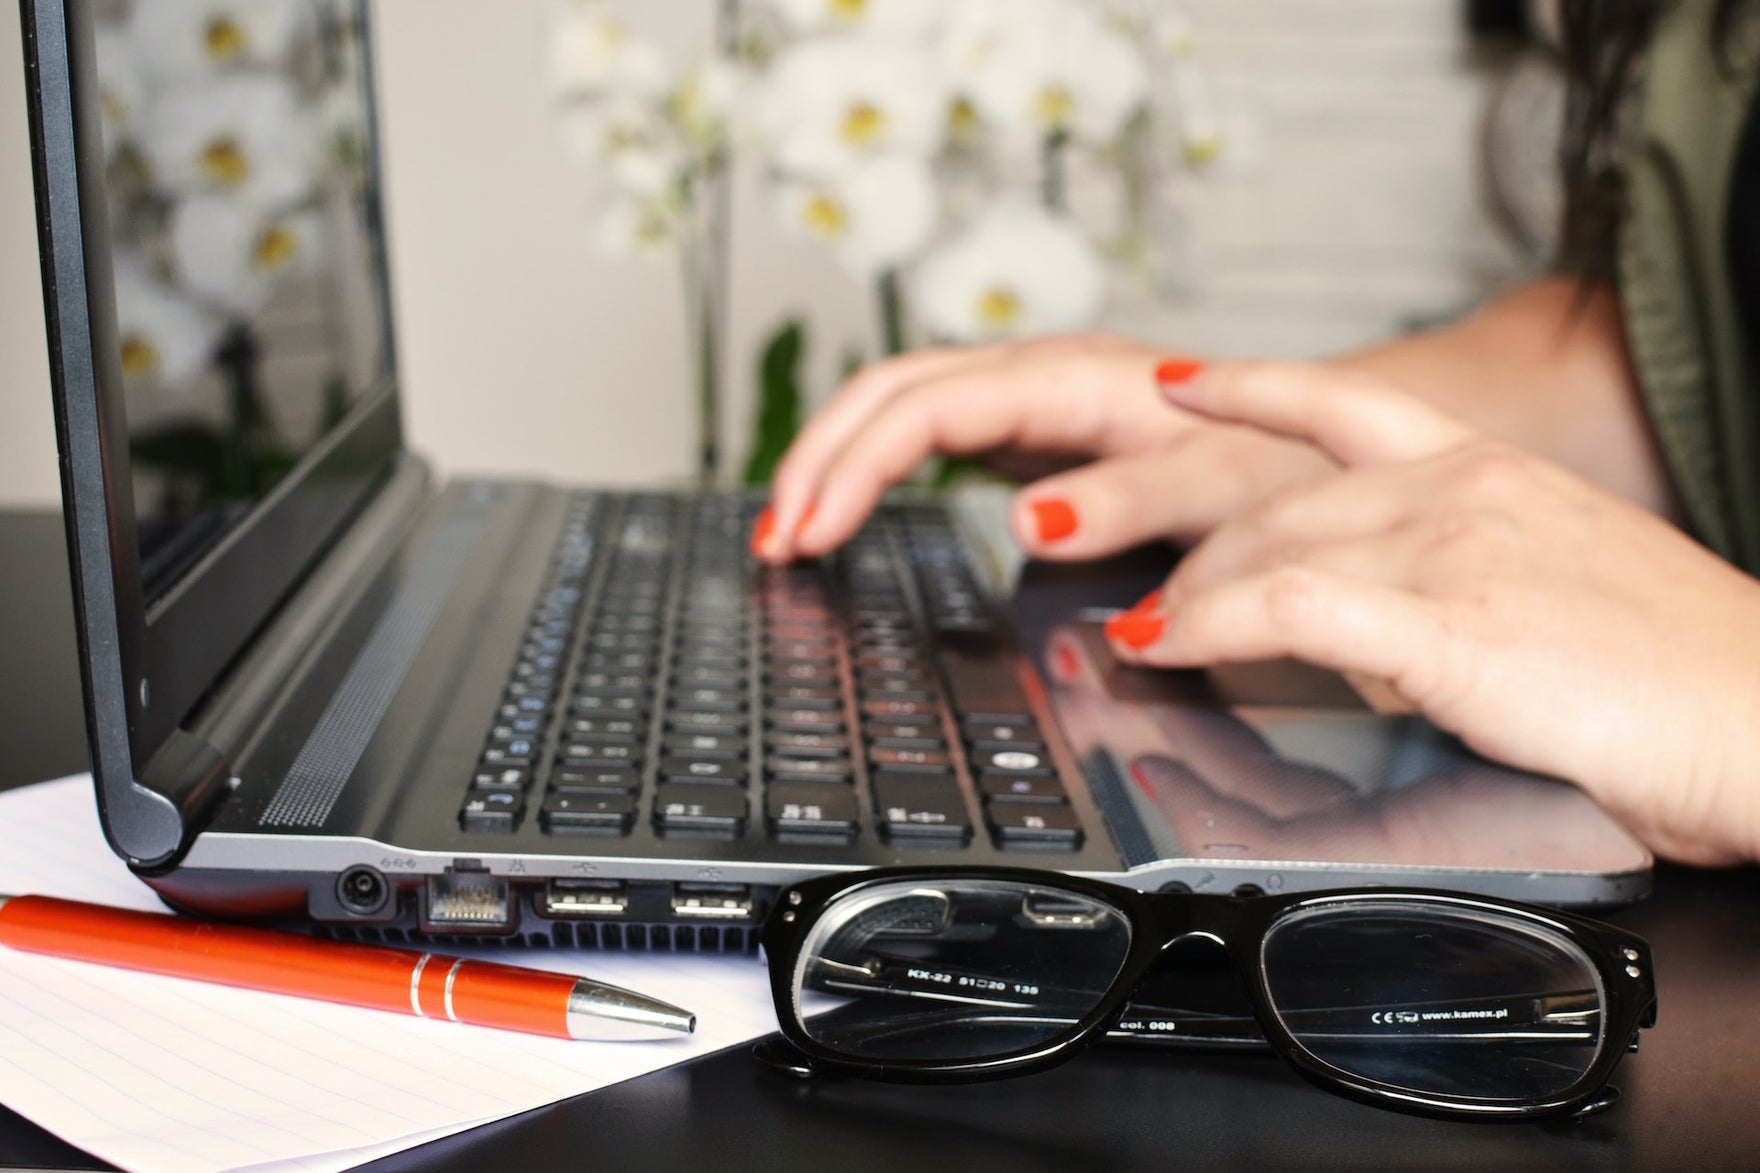 Hands with red nail polish type on a laptop with a set of eyeglasses next to the computer